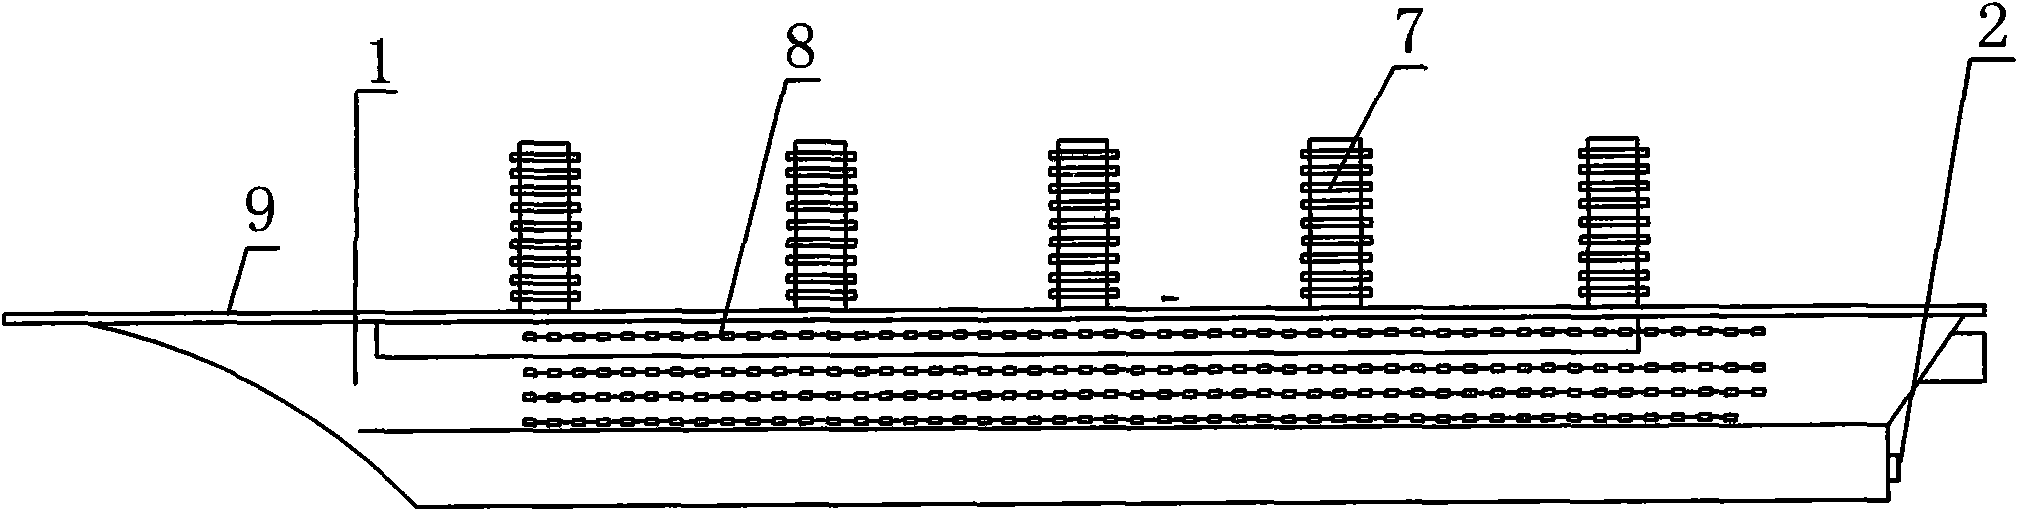 Method for developing South China Sea based on multi-purpose South China Sea travel and vacation training aircraft carrier